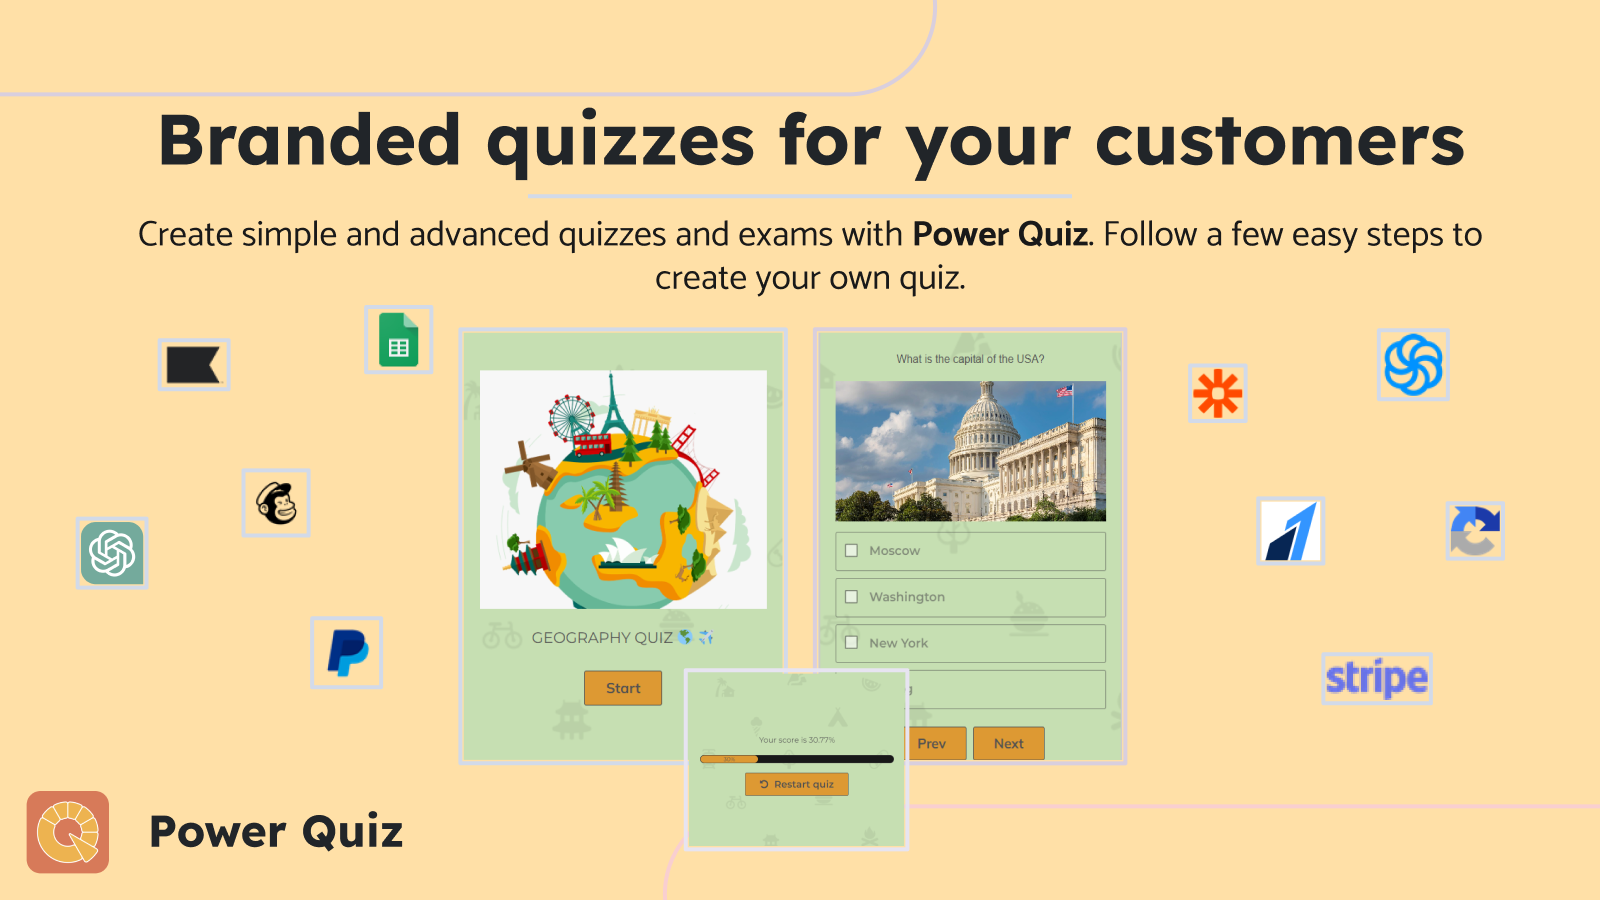 Power Quiz allows you to make an unlimited number of Quizzes.